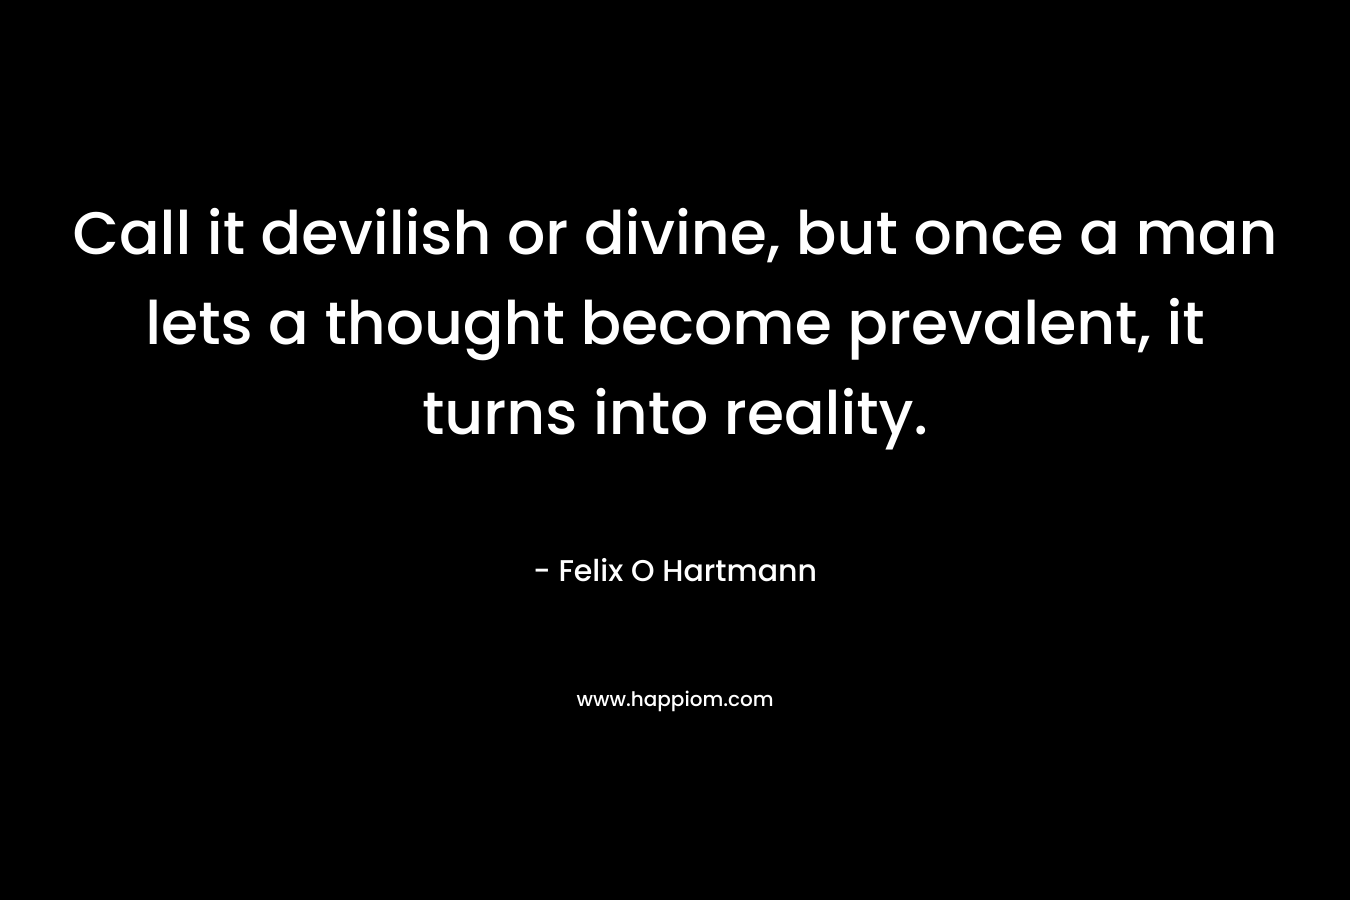 Call it devilish or divine, but once a man lets a thought become prevalent, it turns into reality. – Felix O Hartmann